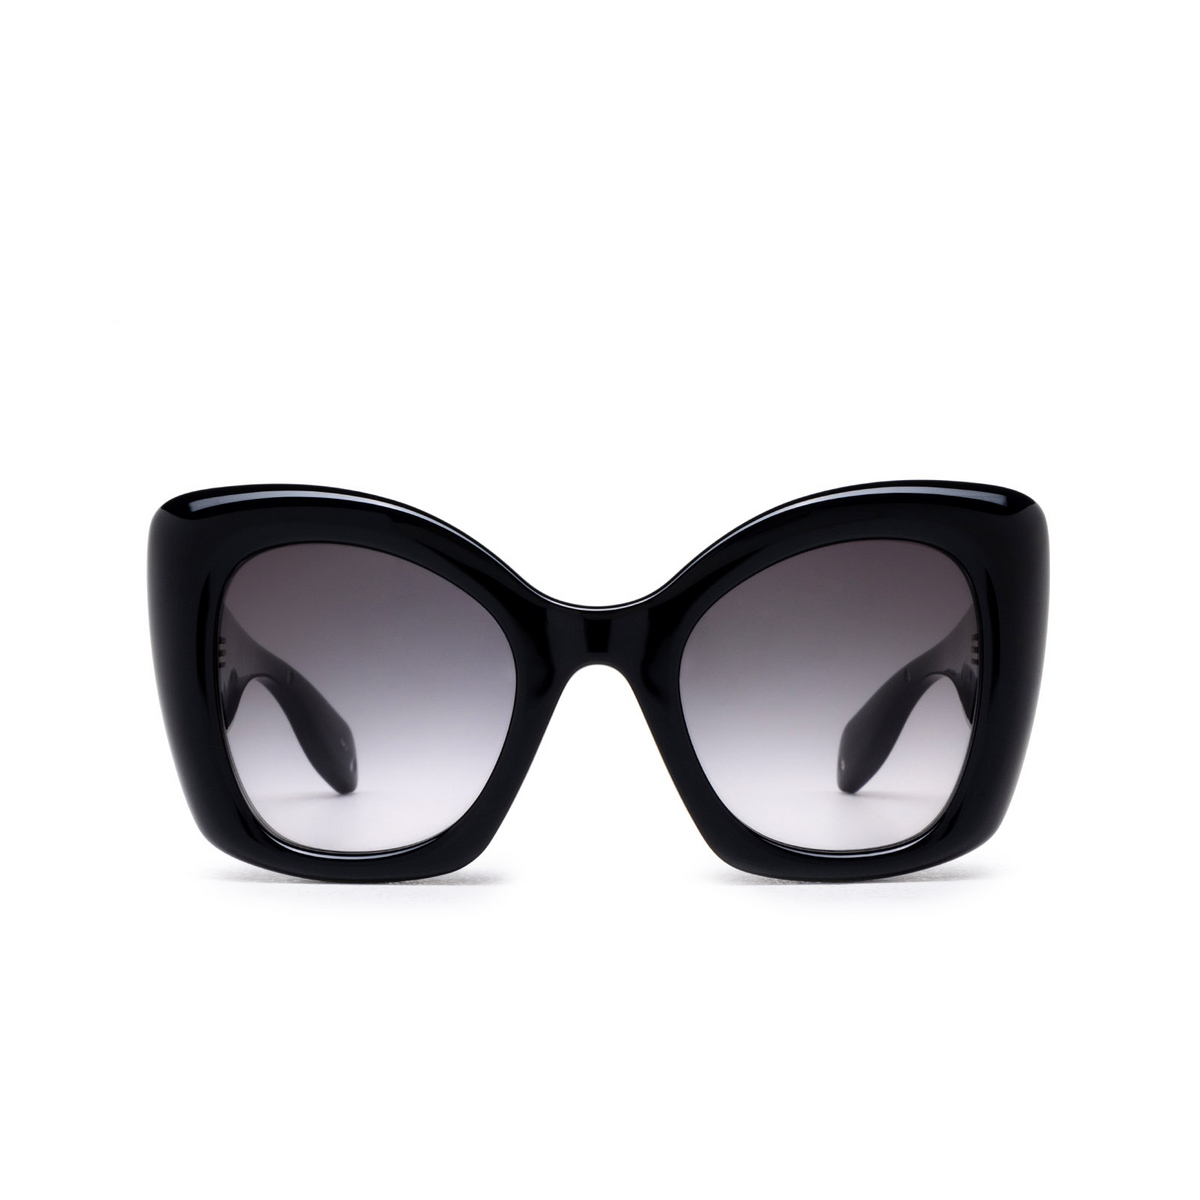 Alexander McQueen The Curve Butterfly Sunglasses 001 Black - front view